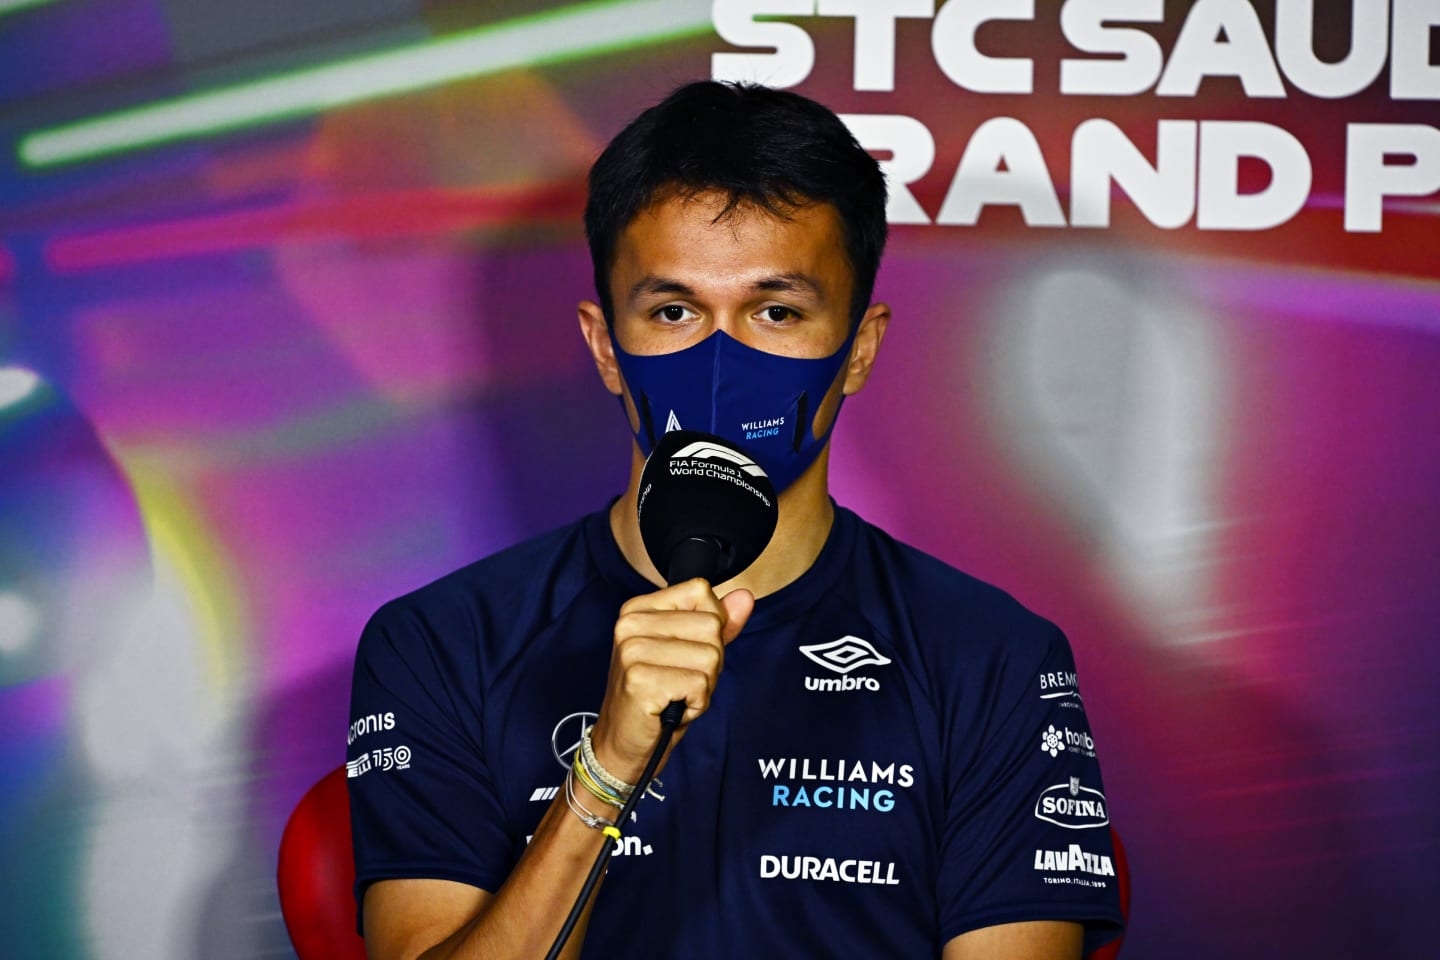 JEDDAH, SAUDI ARABIA - MARCH 25: Alexander Albon of Thailand and Williams talks in the Drivers Press Conference before practice ahead of the F1 Grand Prix of Saudi Arabia at the Jeddah Corniche Circuit on March 25, 2022 in Jeddah, Saudi Arabia. (Photo by Clive Mason/Getty Images)